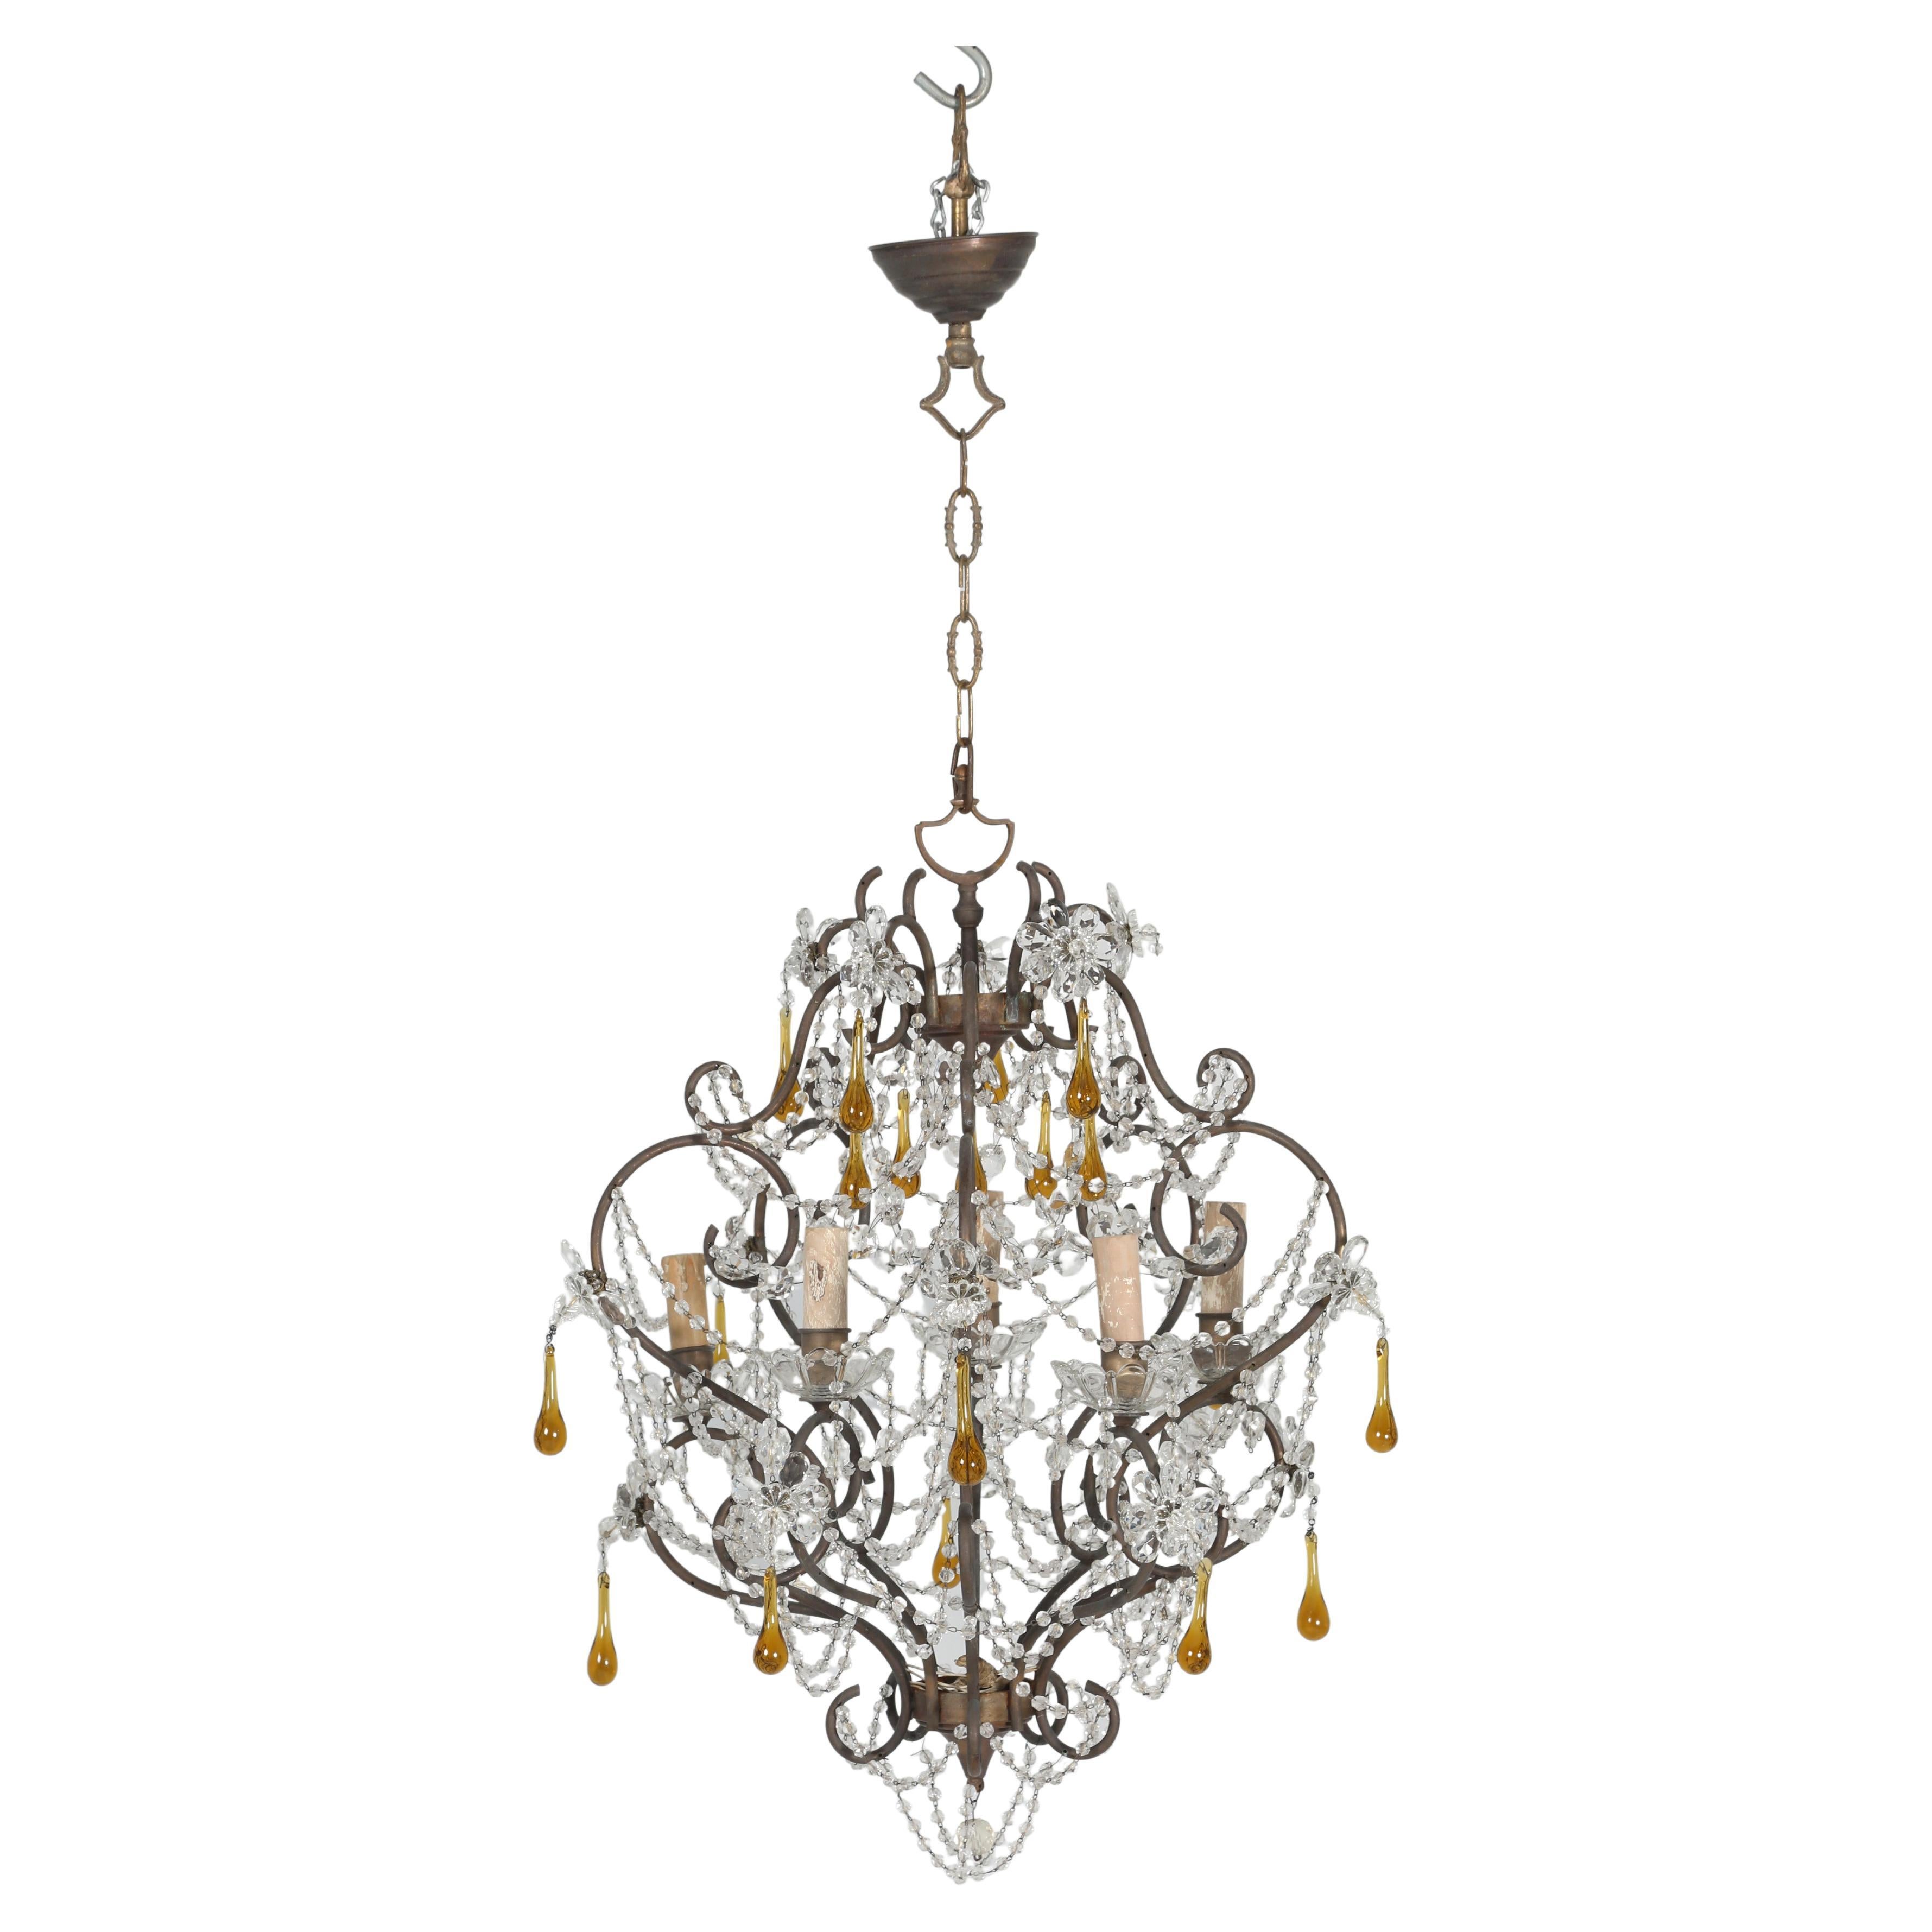 Vintage Italian 5-Light Chandelier with Matching Canopy For Sale